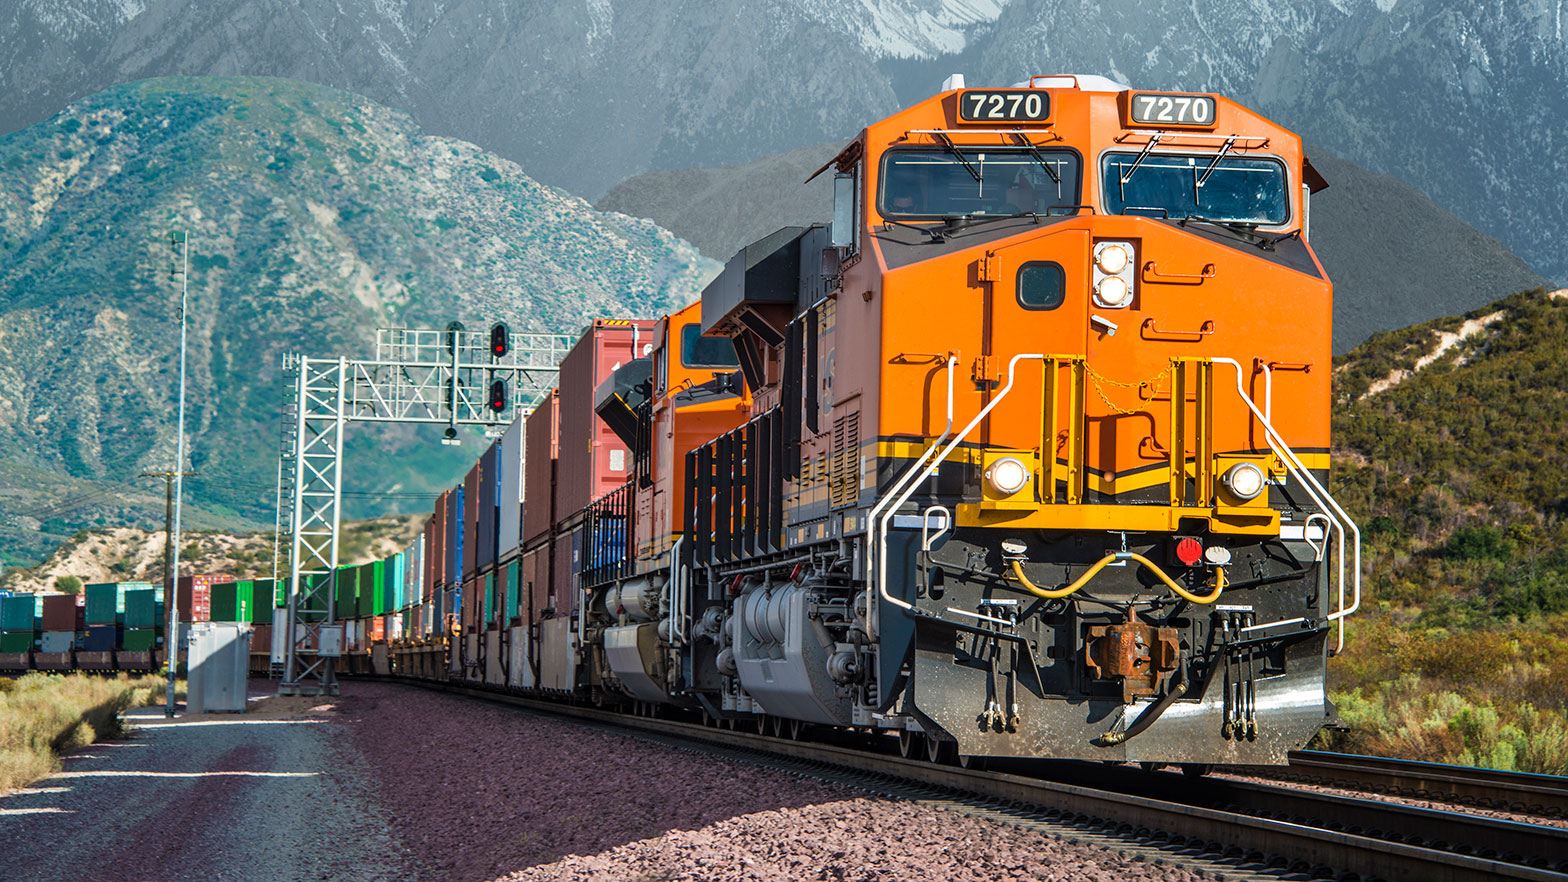 Freight train in a mountain environment. 